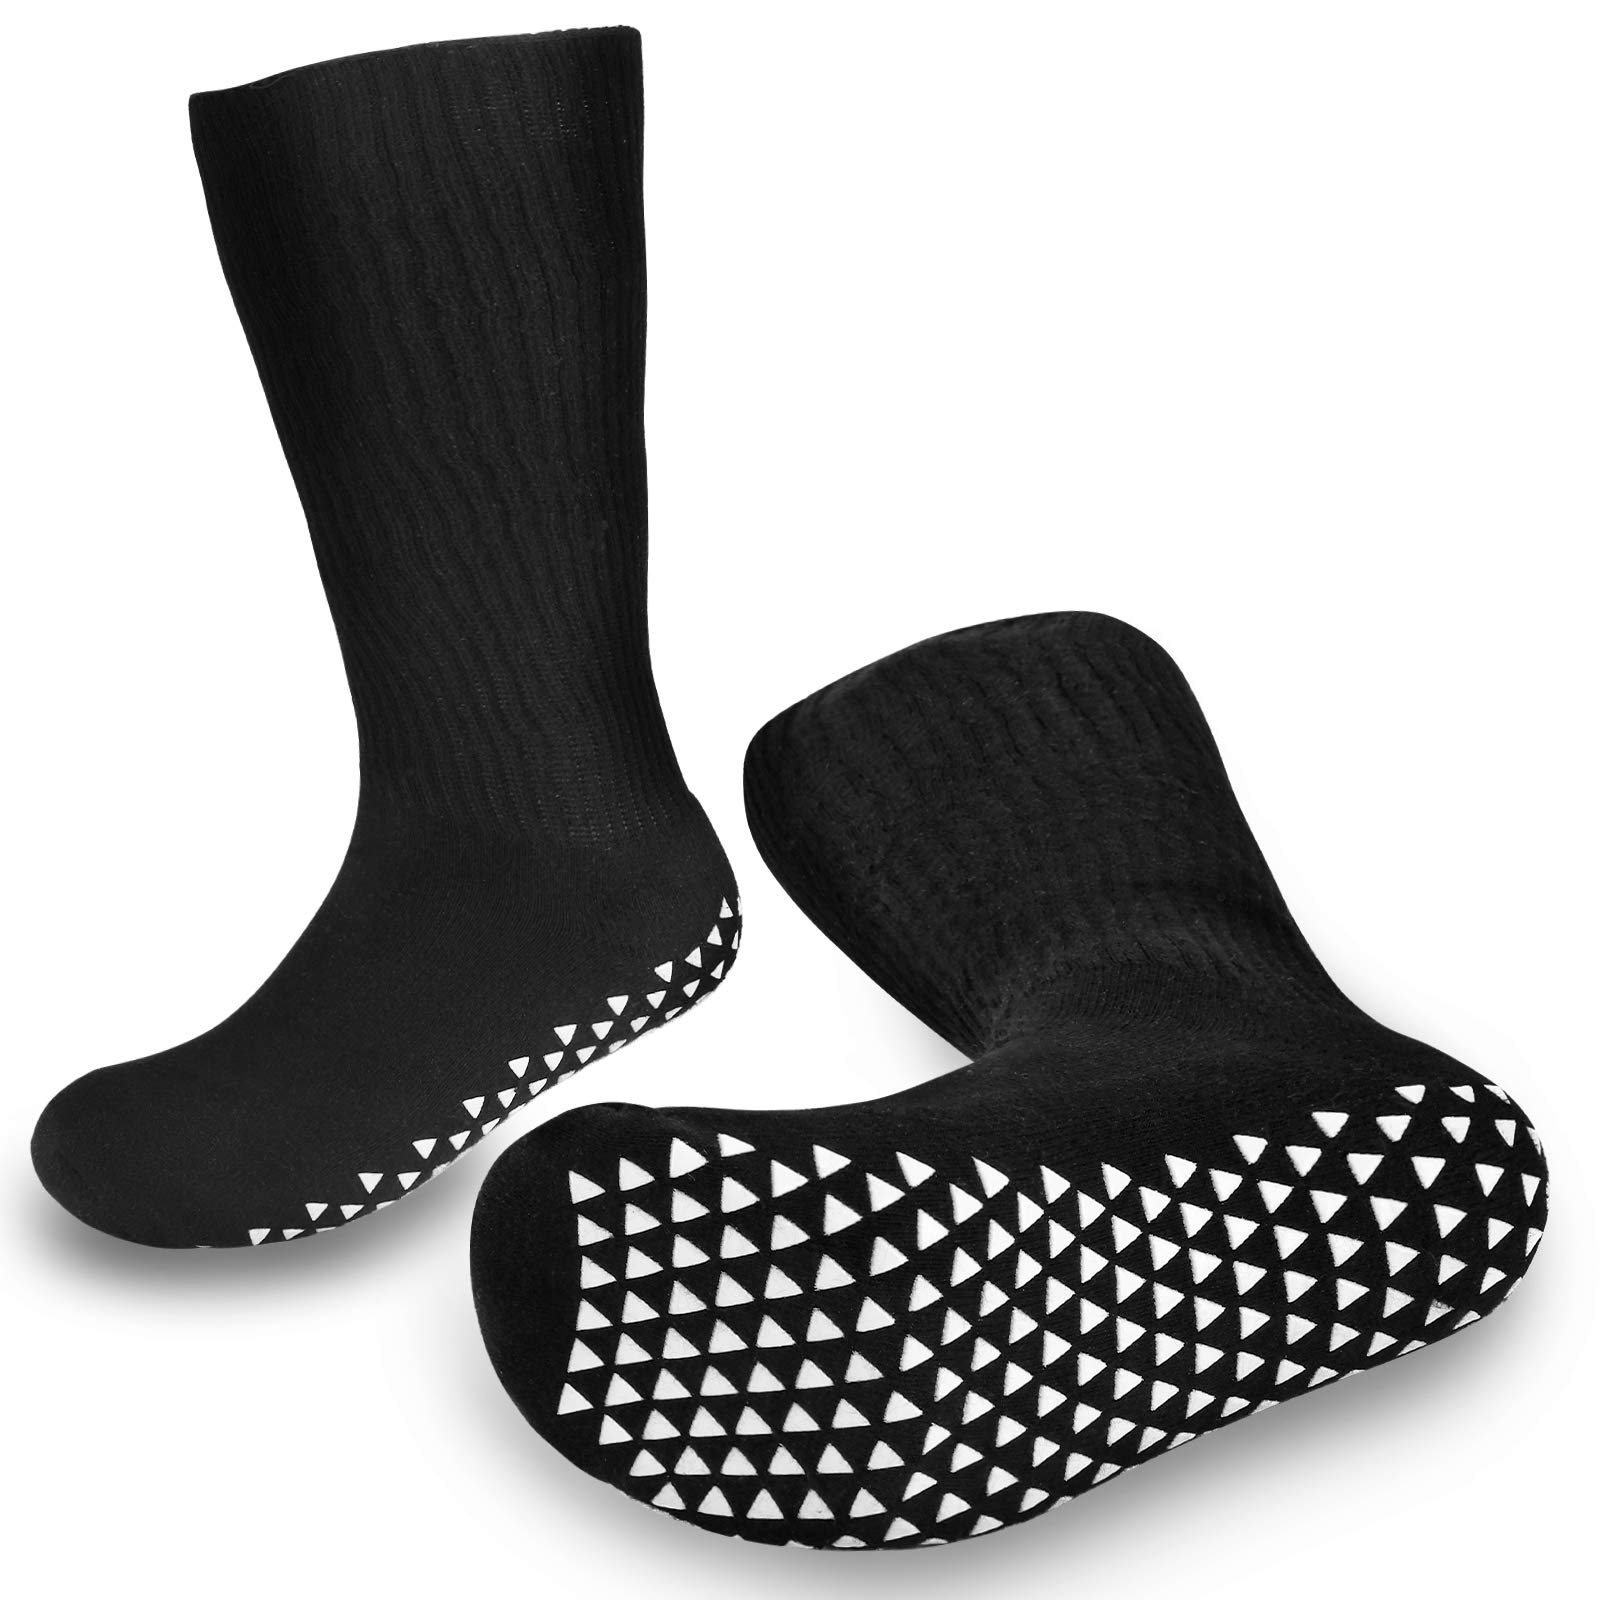 2 Pair Width Socks for Lymphedema Stretches up Over Calf girth 21 fit ...